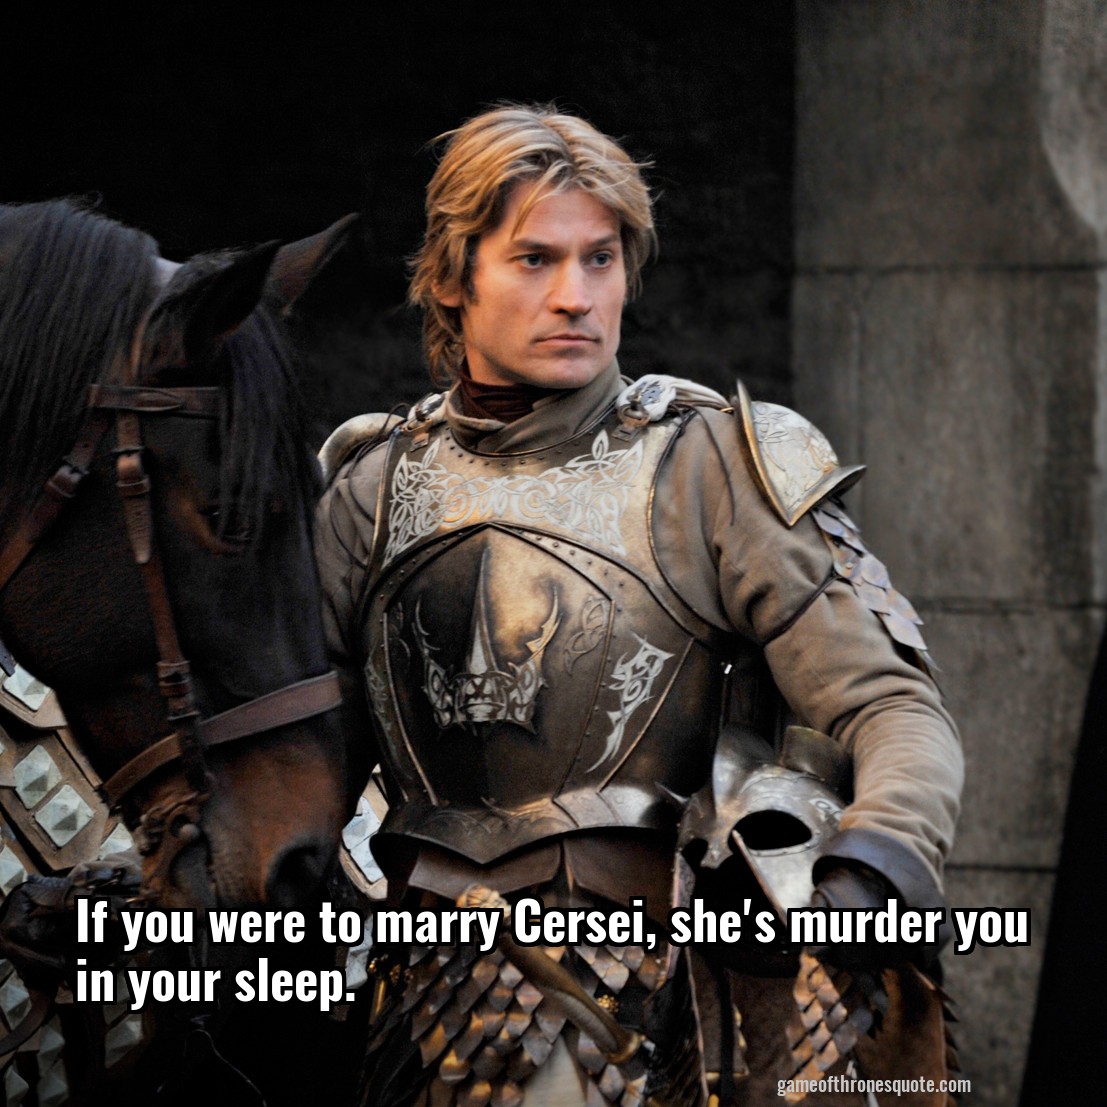 If you were to marry Cersei, she's murder you in your sleep. 